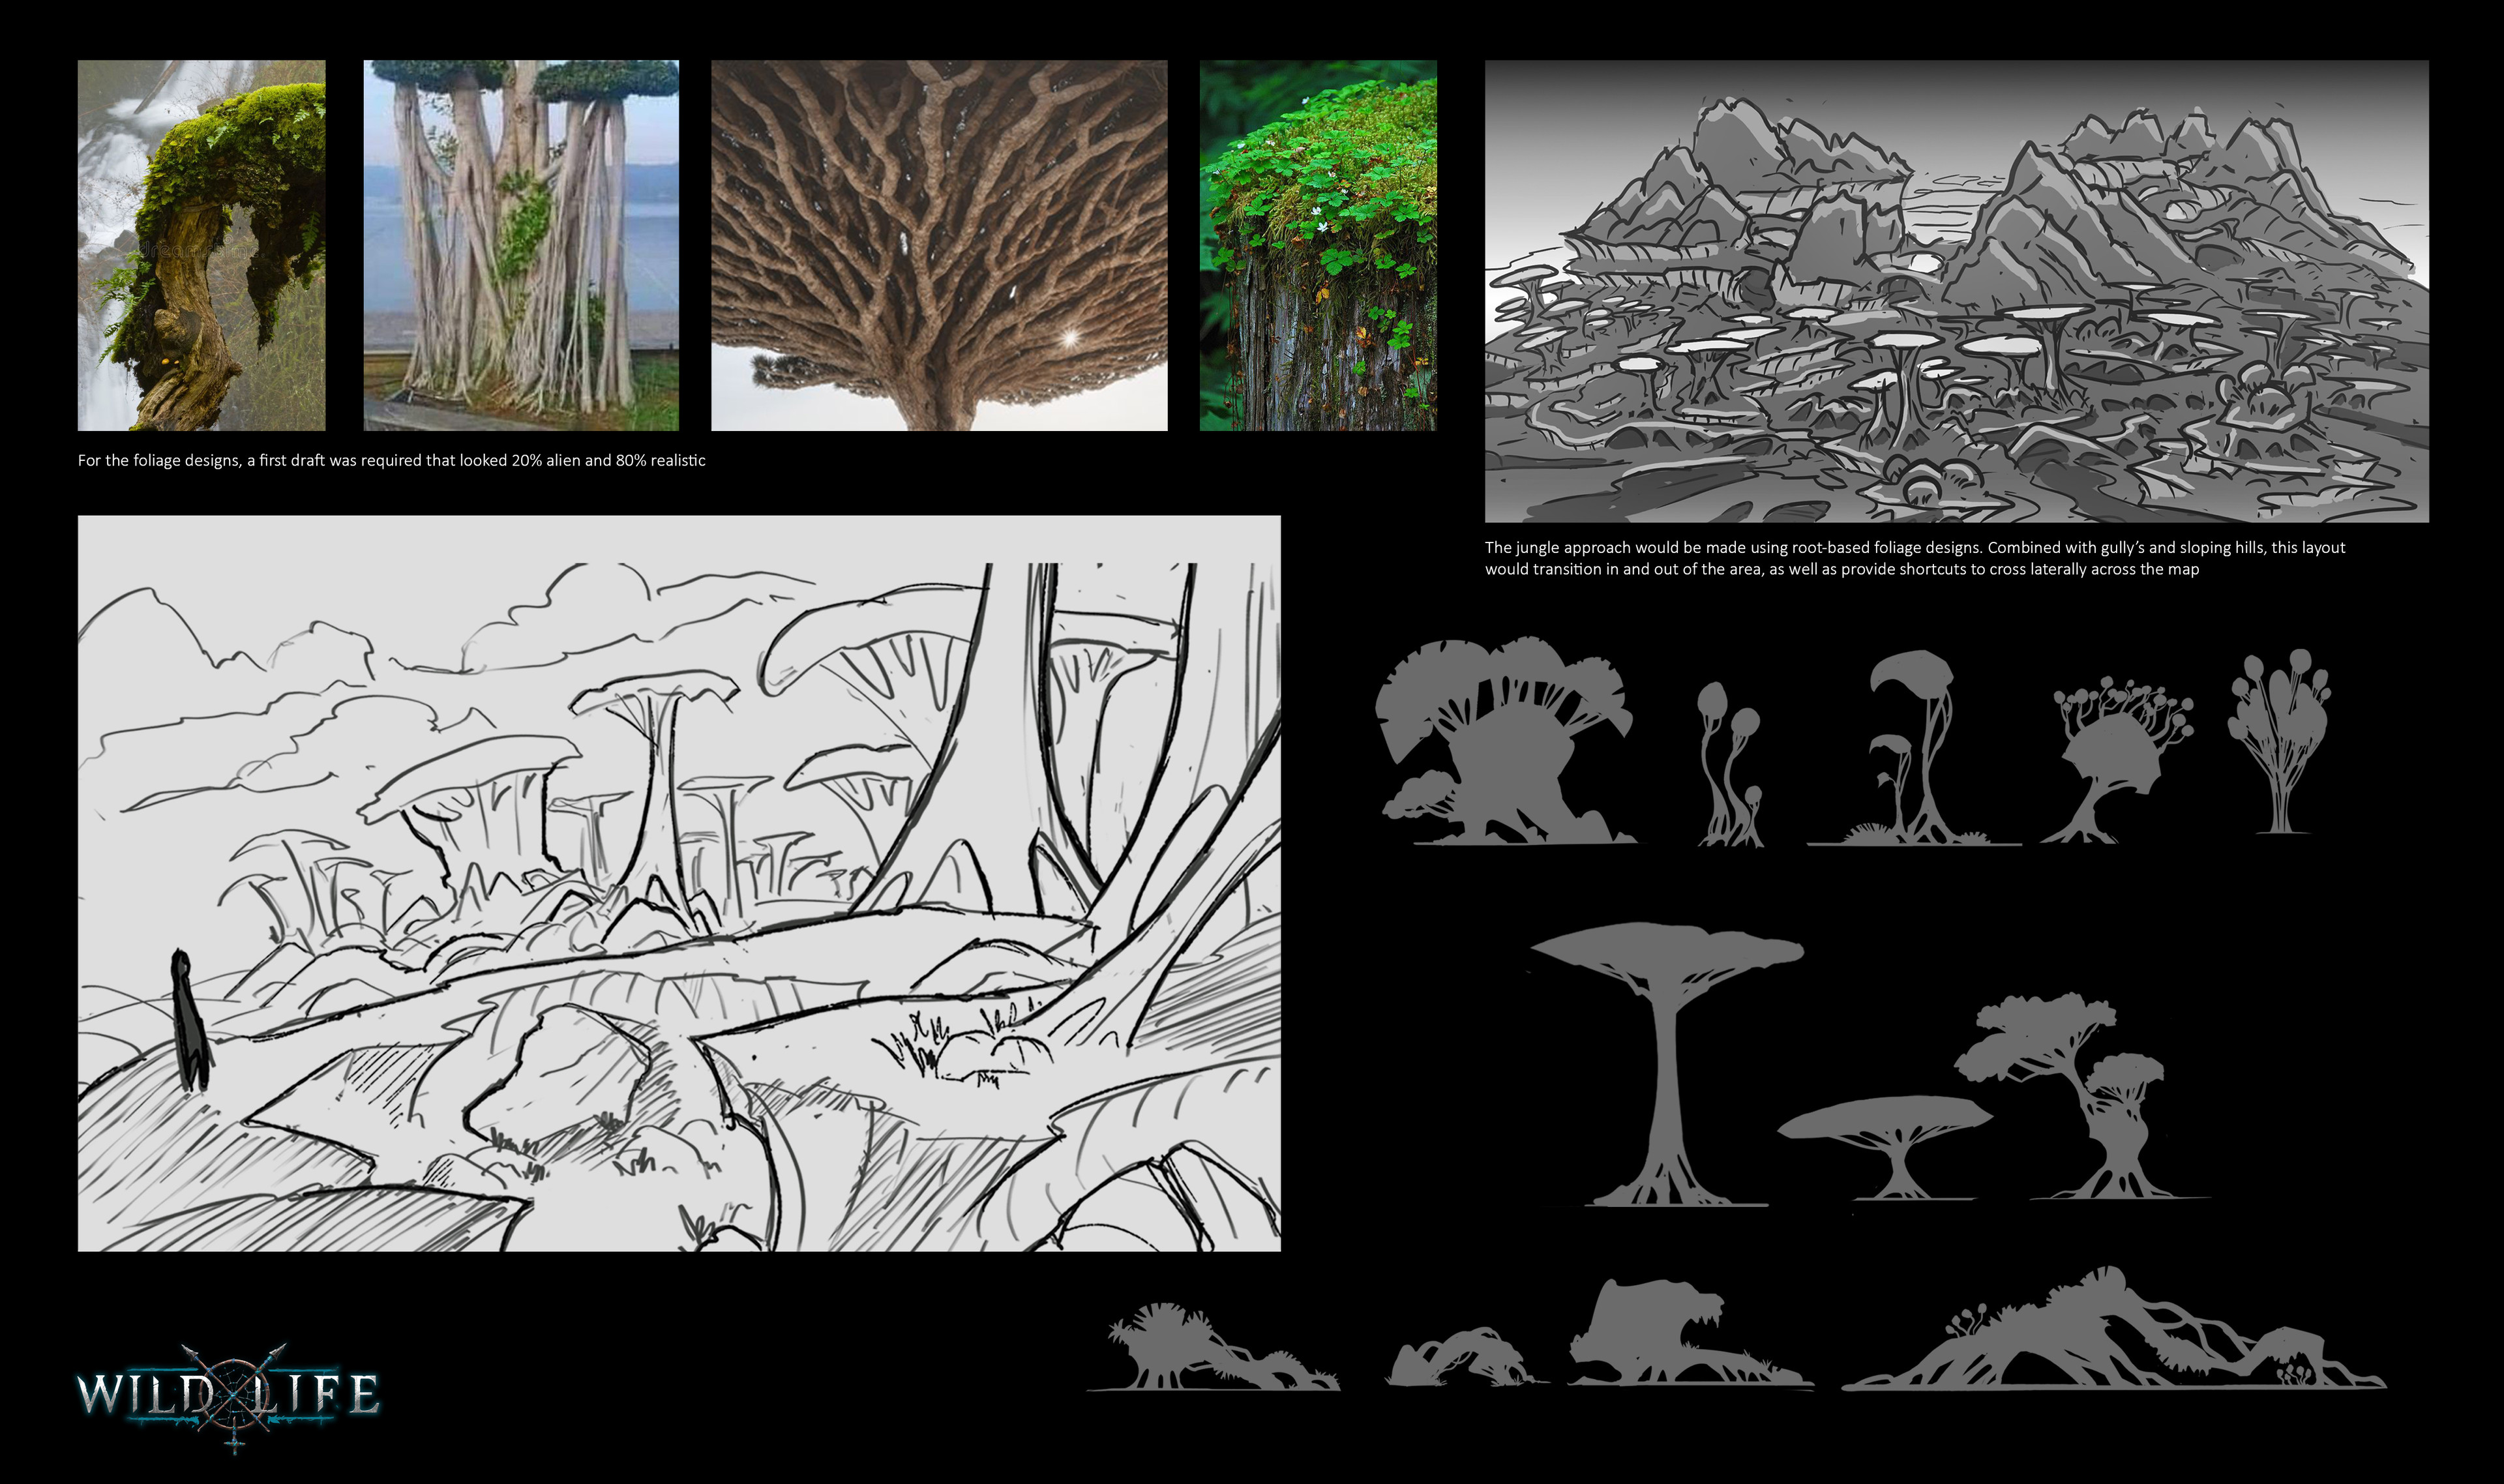 Very early draft sketches and designs for the region's jungle